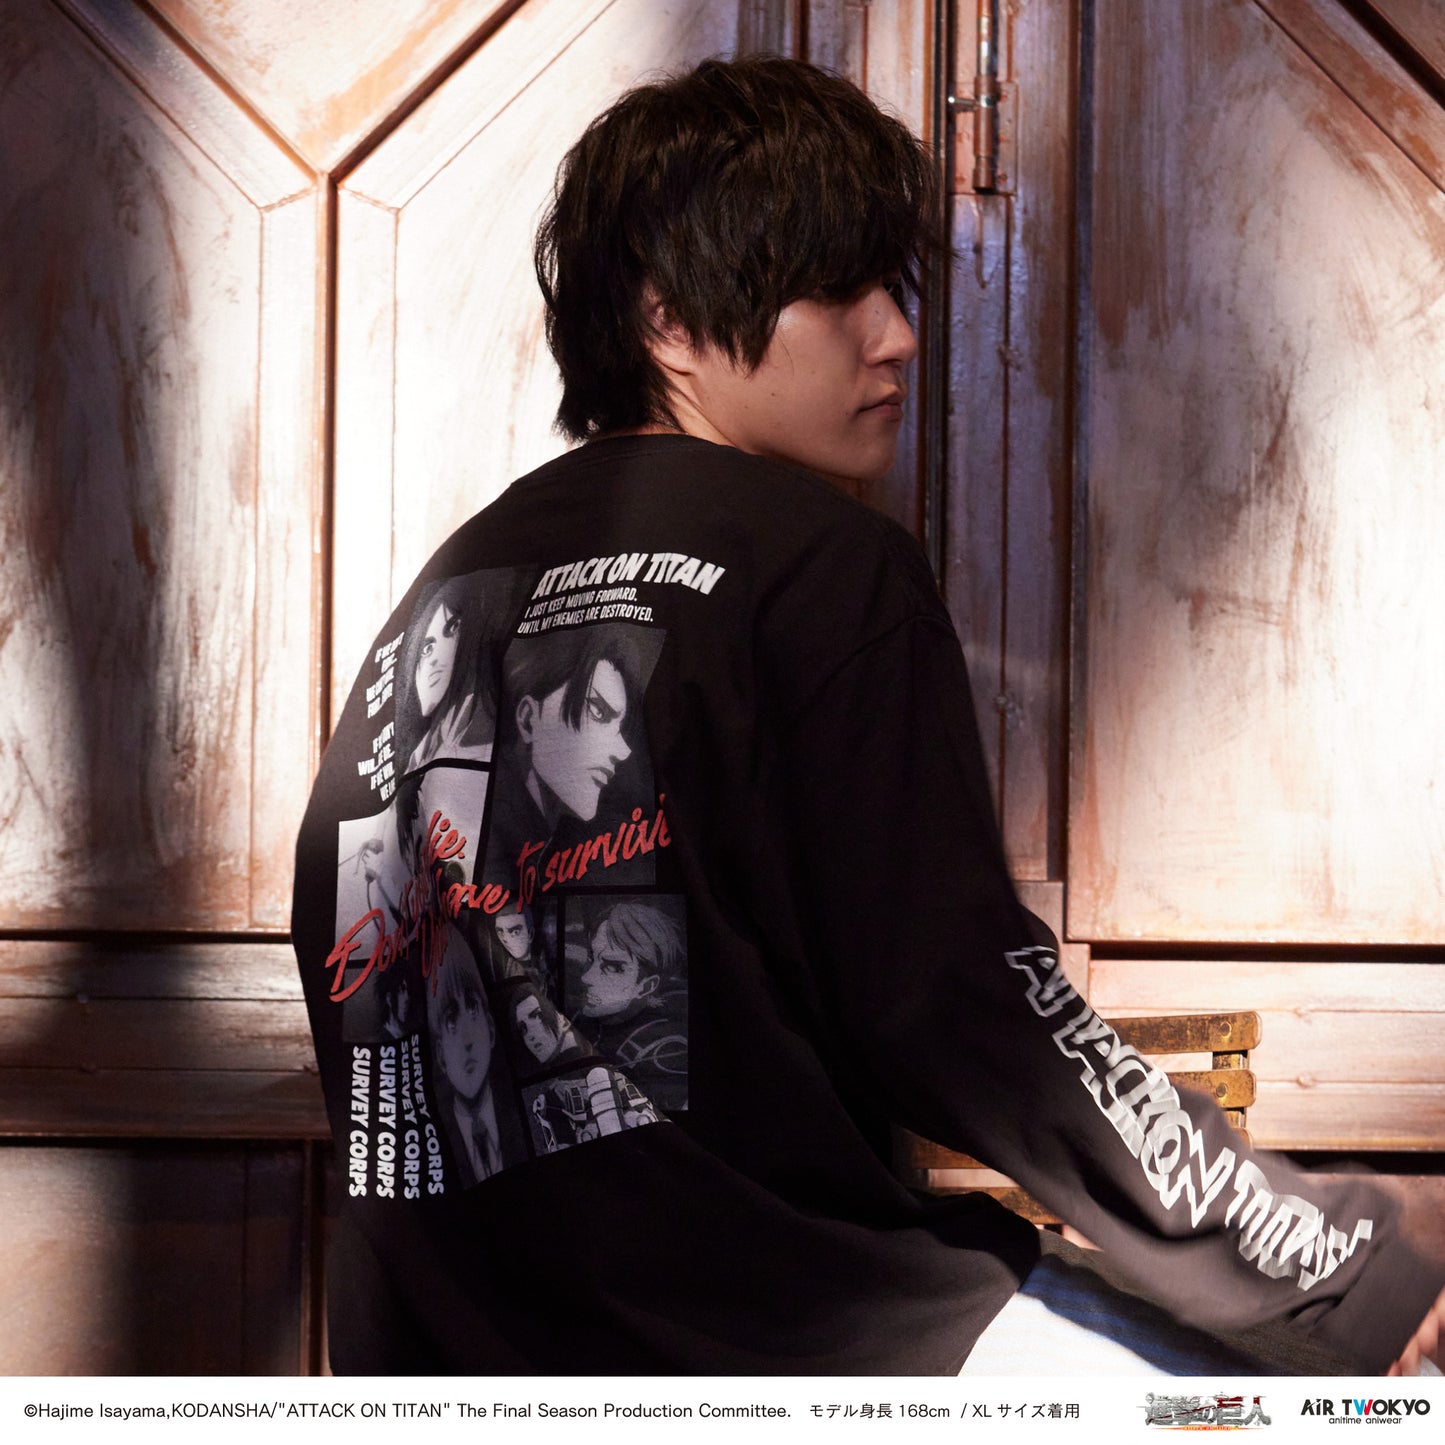 "Attack on Titan"  The Final Season Collage Graphic Long Sleeve T-shirt